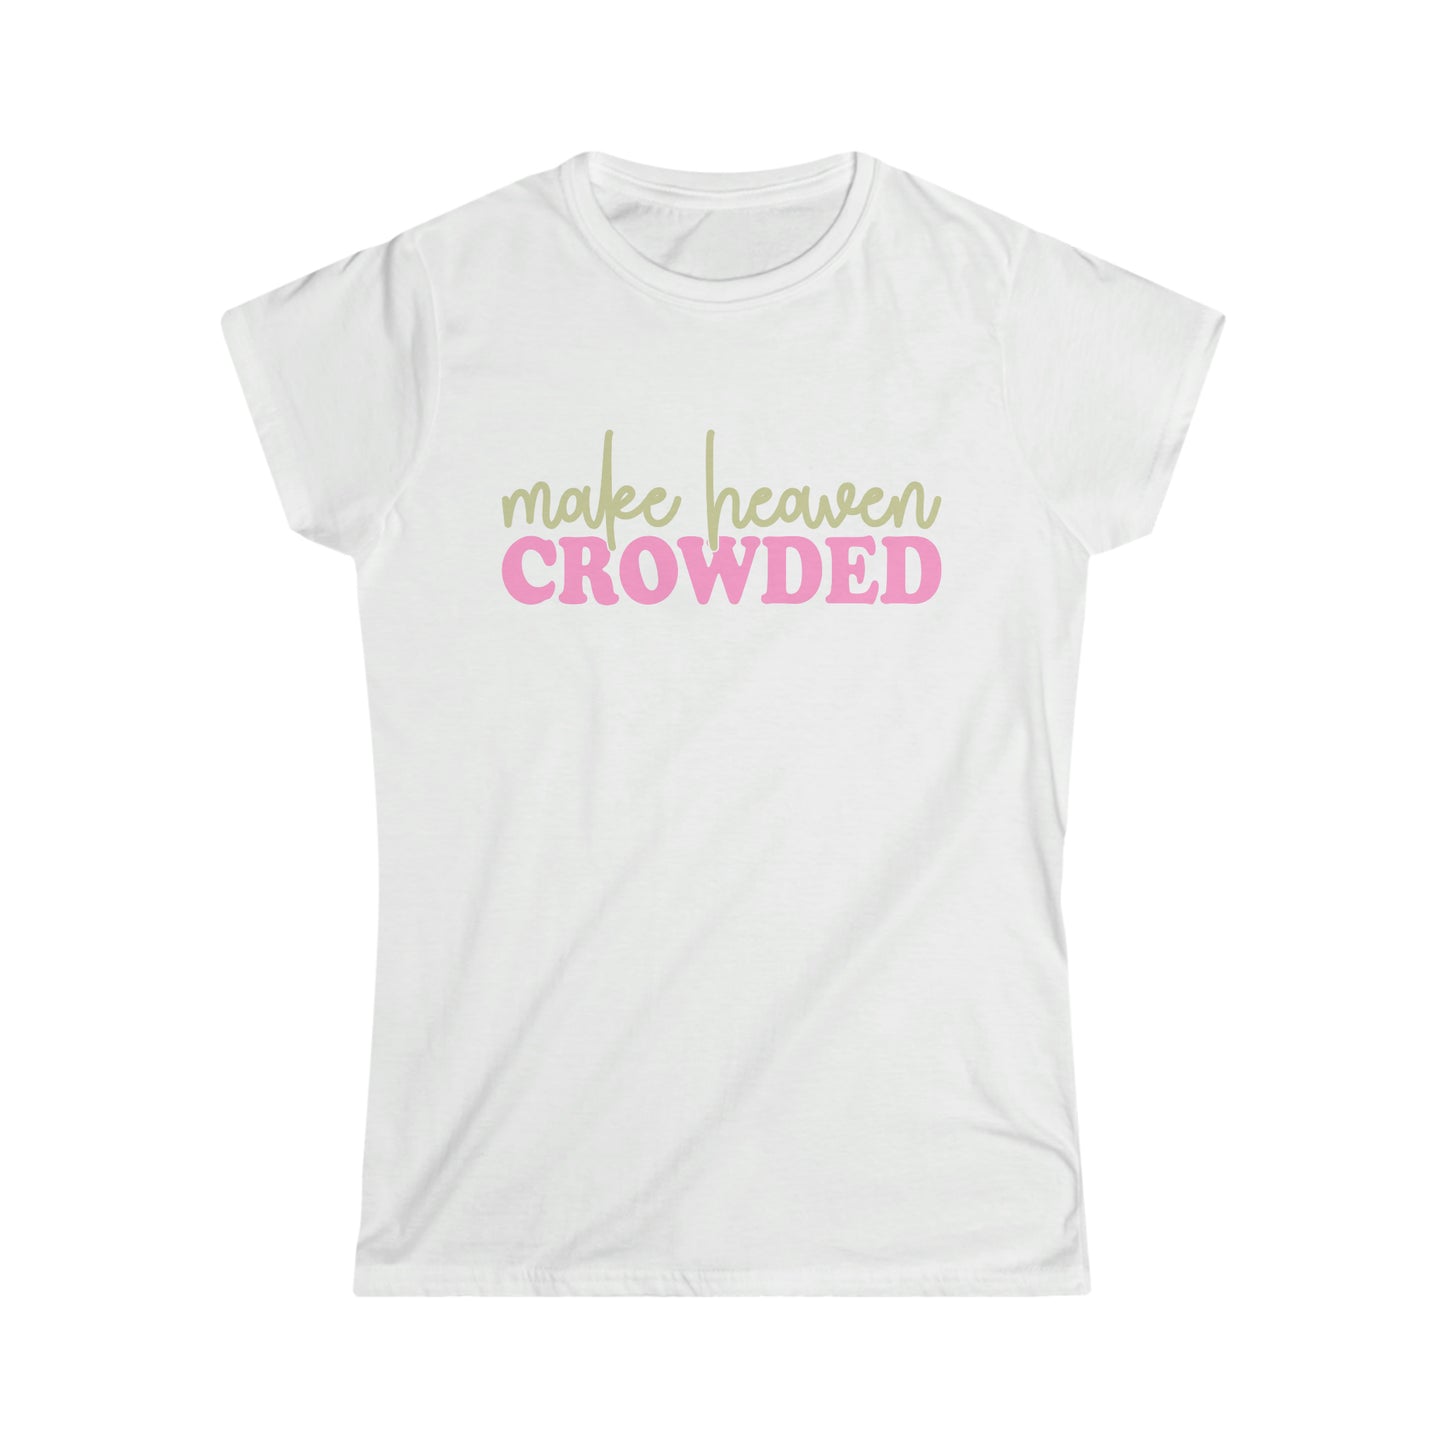 Christian Apparel (Make Heaven Crowded/ Women's Softstyle Tee)